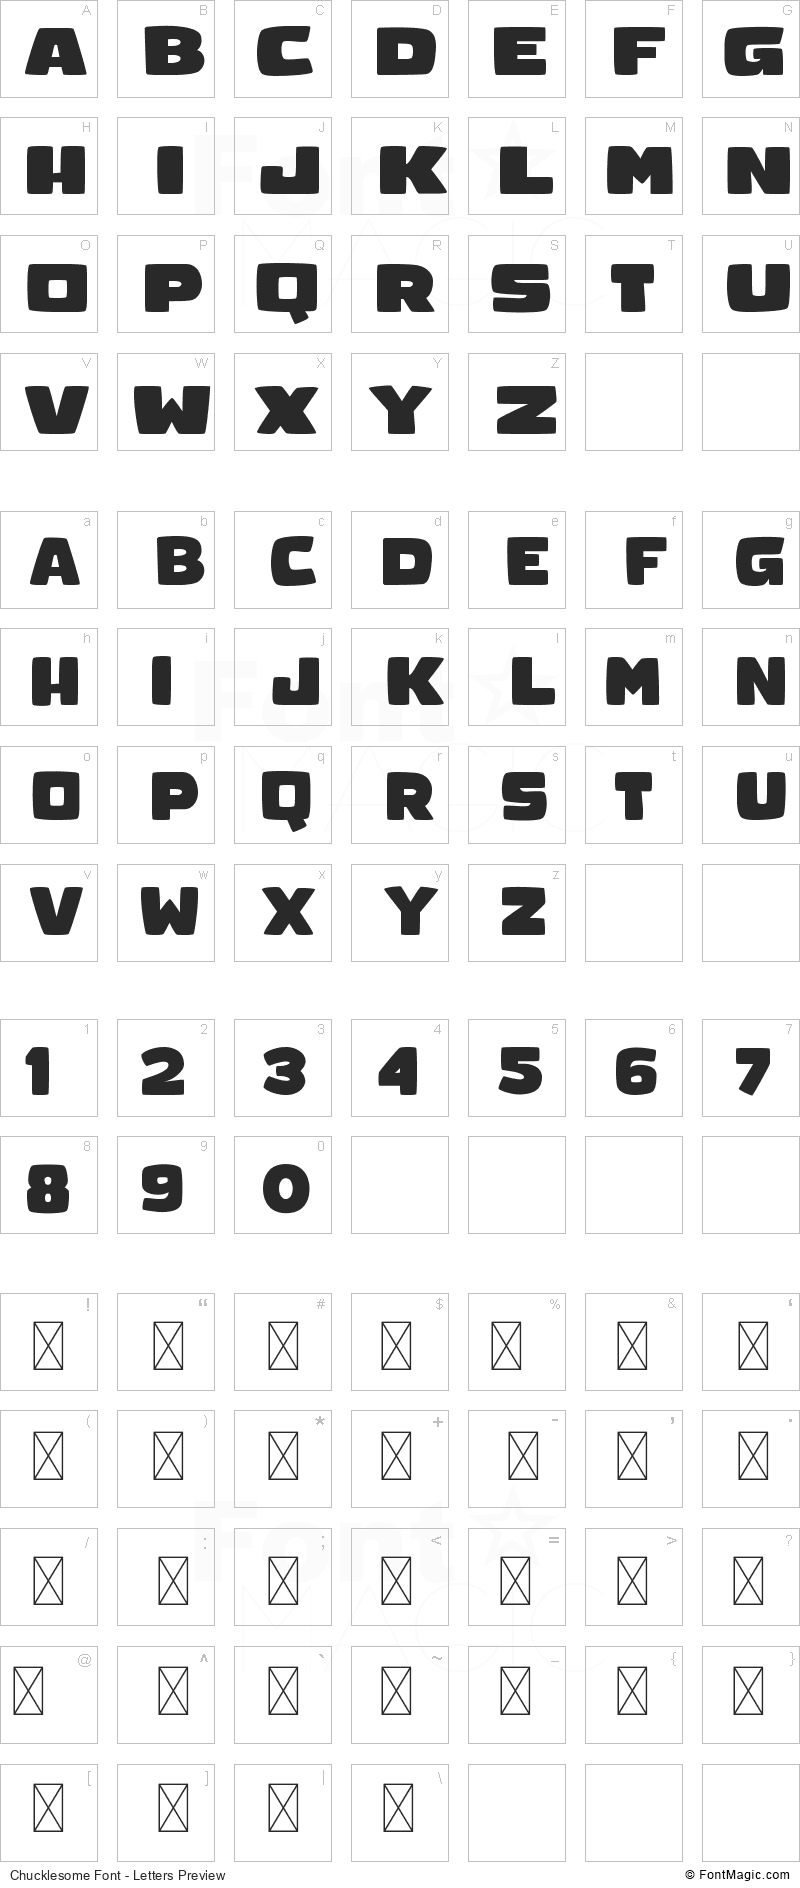 Chucklesome Font - All Latters Preview Chart